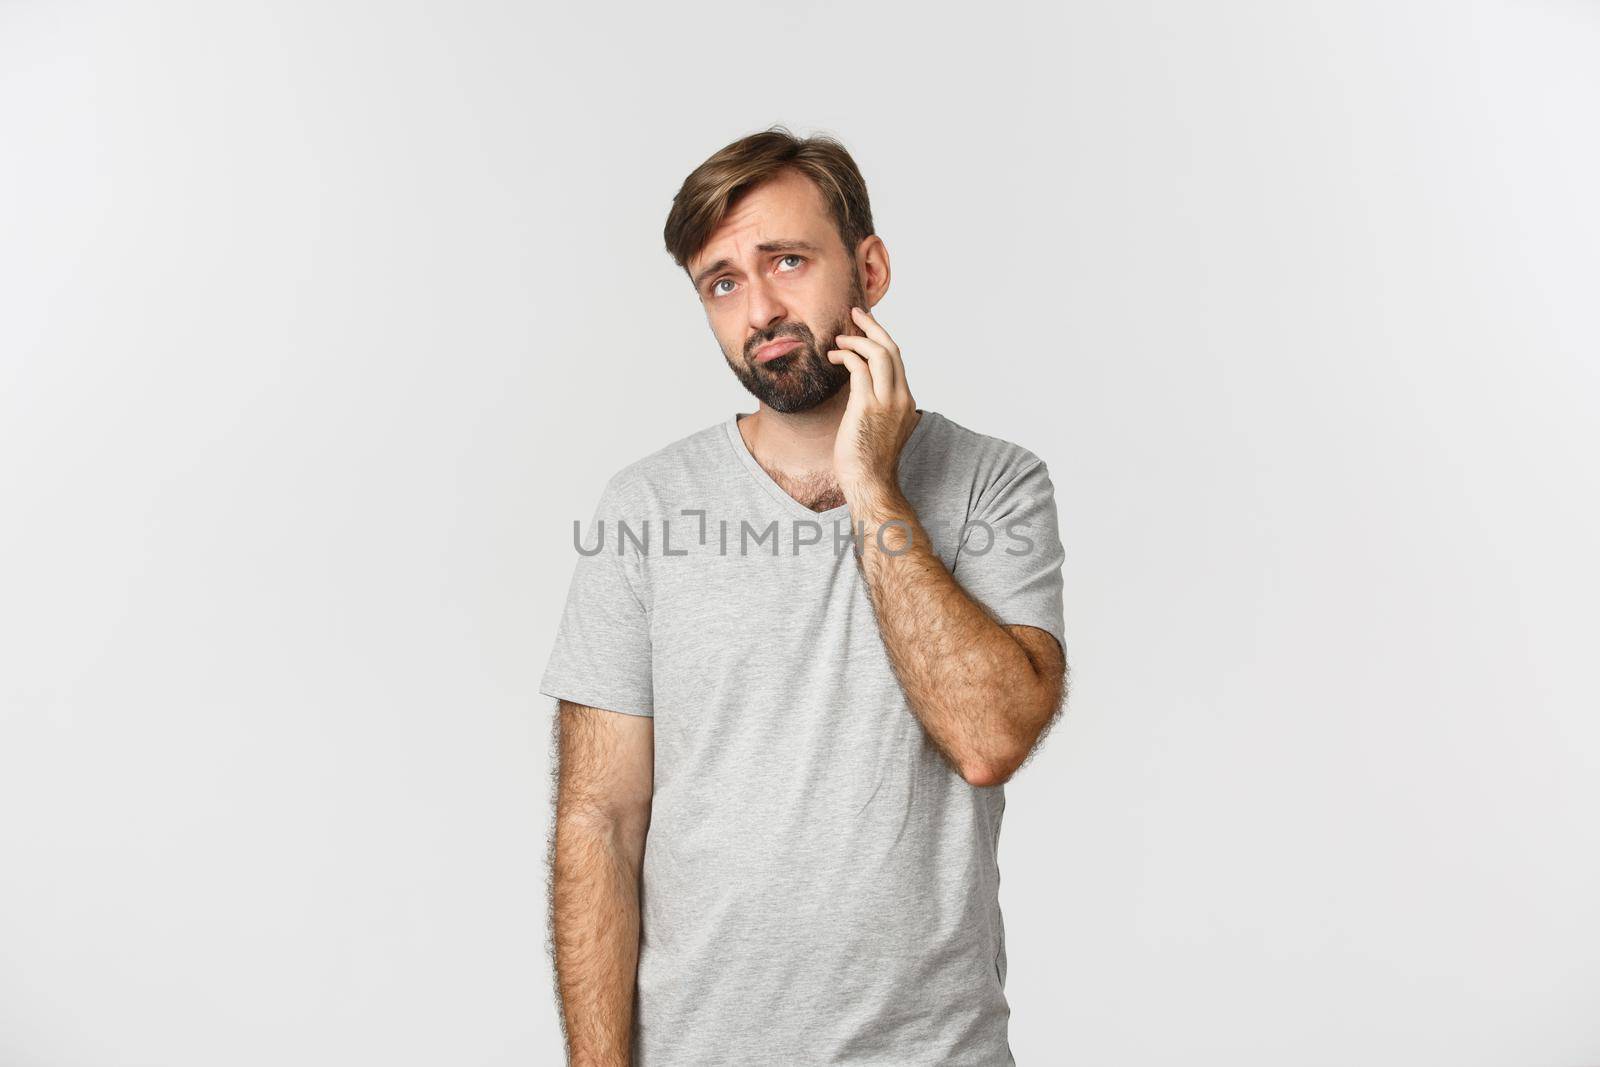 Portrait of indecisive sad man in gray t-shirt, scratching neck and looking up puzzled, standing over white background.